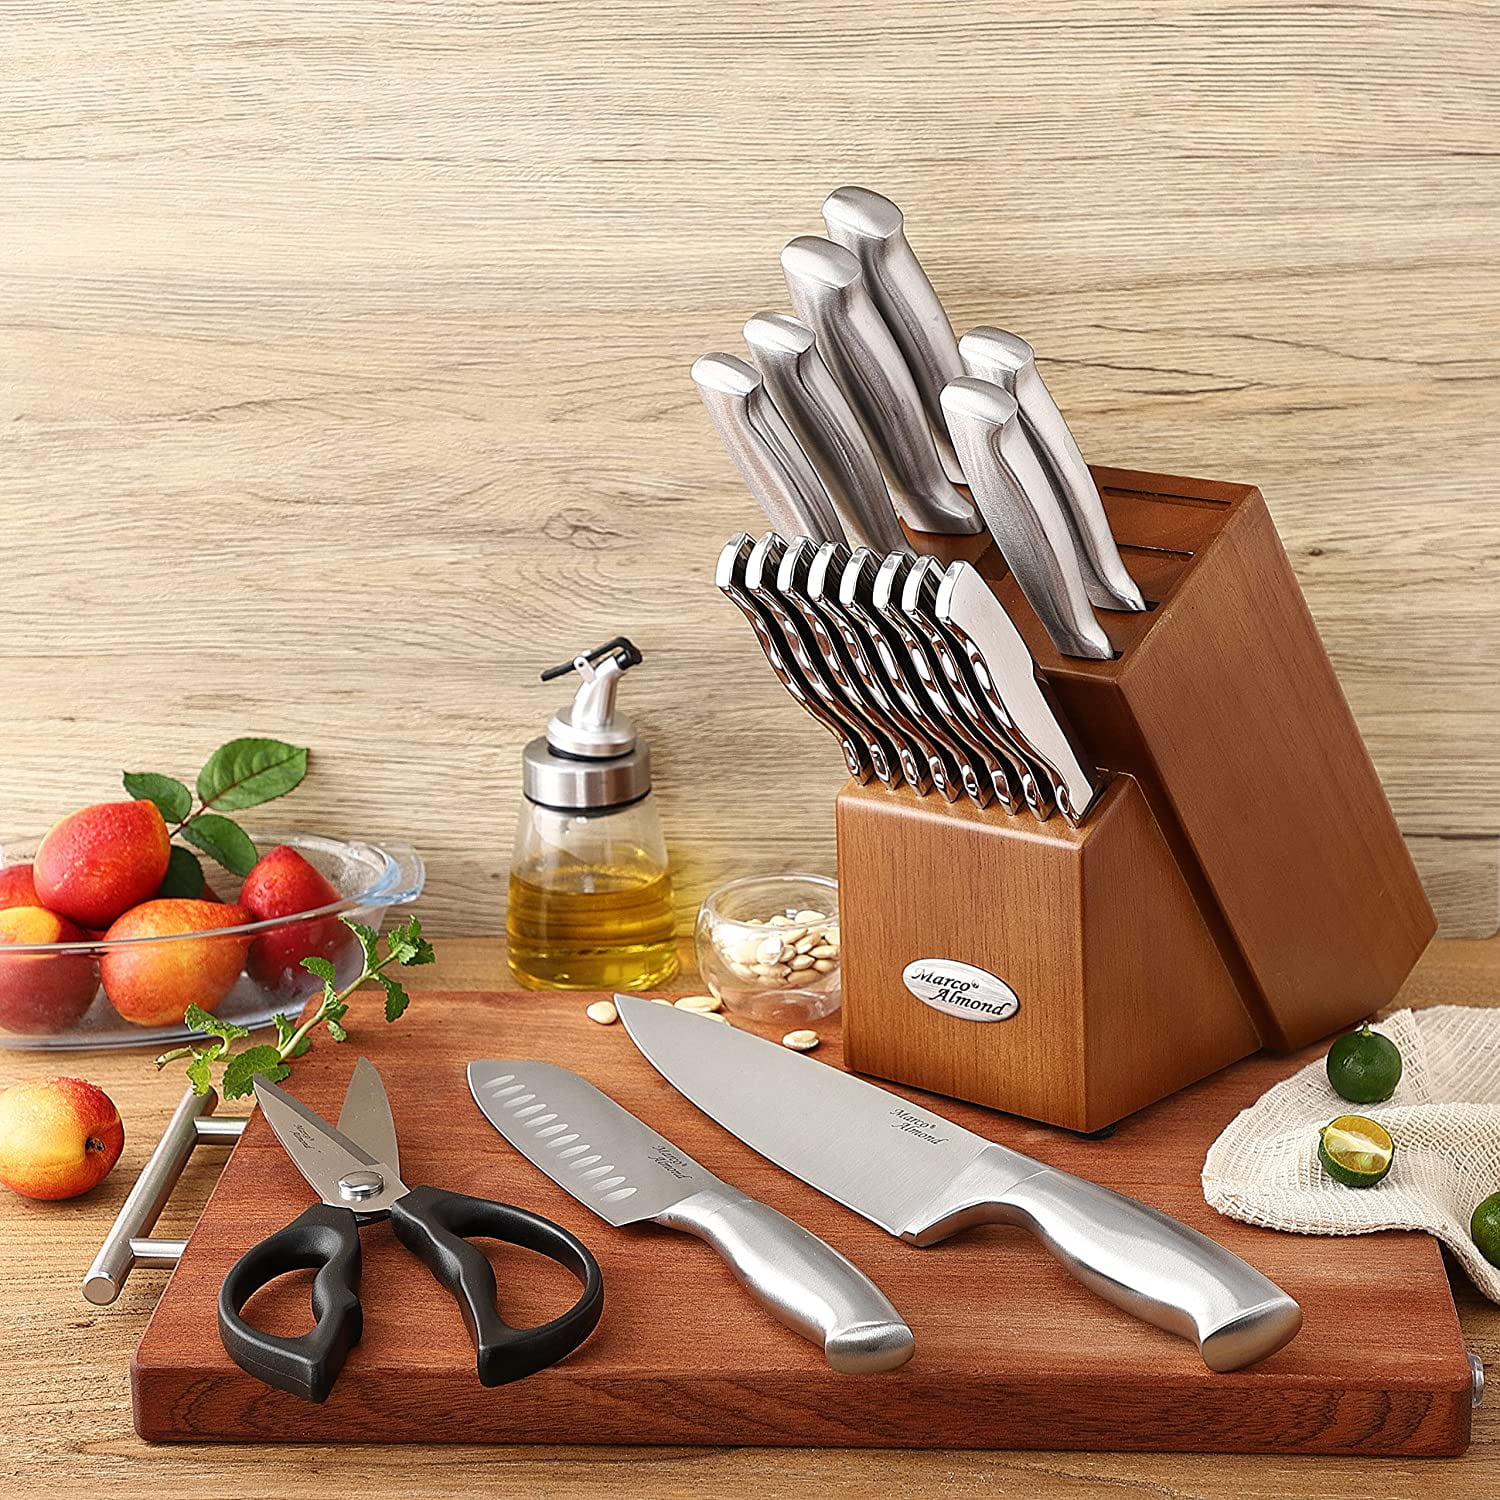  Marco Almond Knife Set Artistic Designed Pattern Kitchen Knife  6 Stainless Steel Kitchen Knives w 6 Blade Guards,Dishwasher Safe Gifts for  Family Kitchen Gift for Chefs Wedding Presents: Home & Kitchen